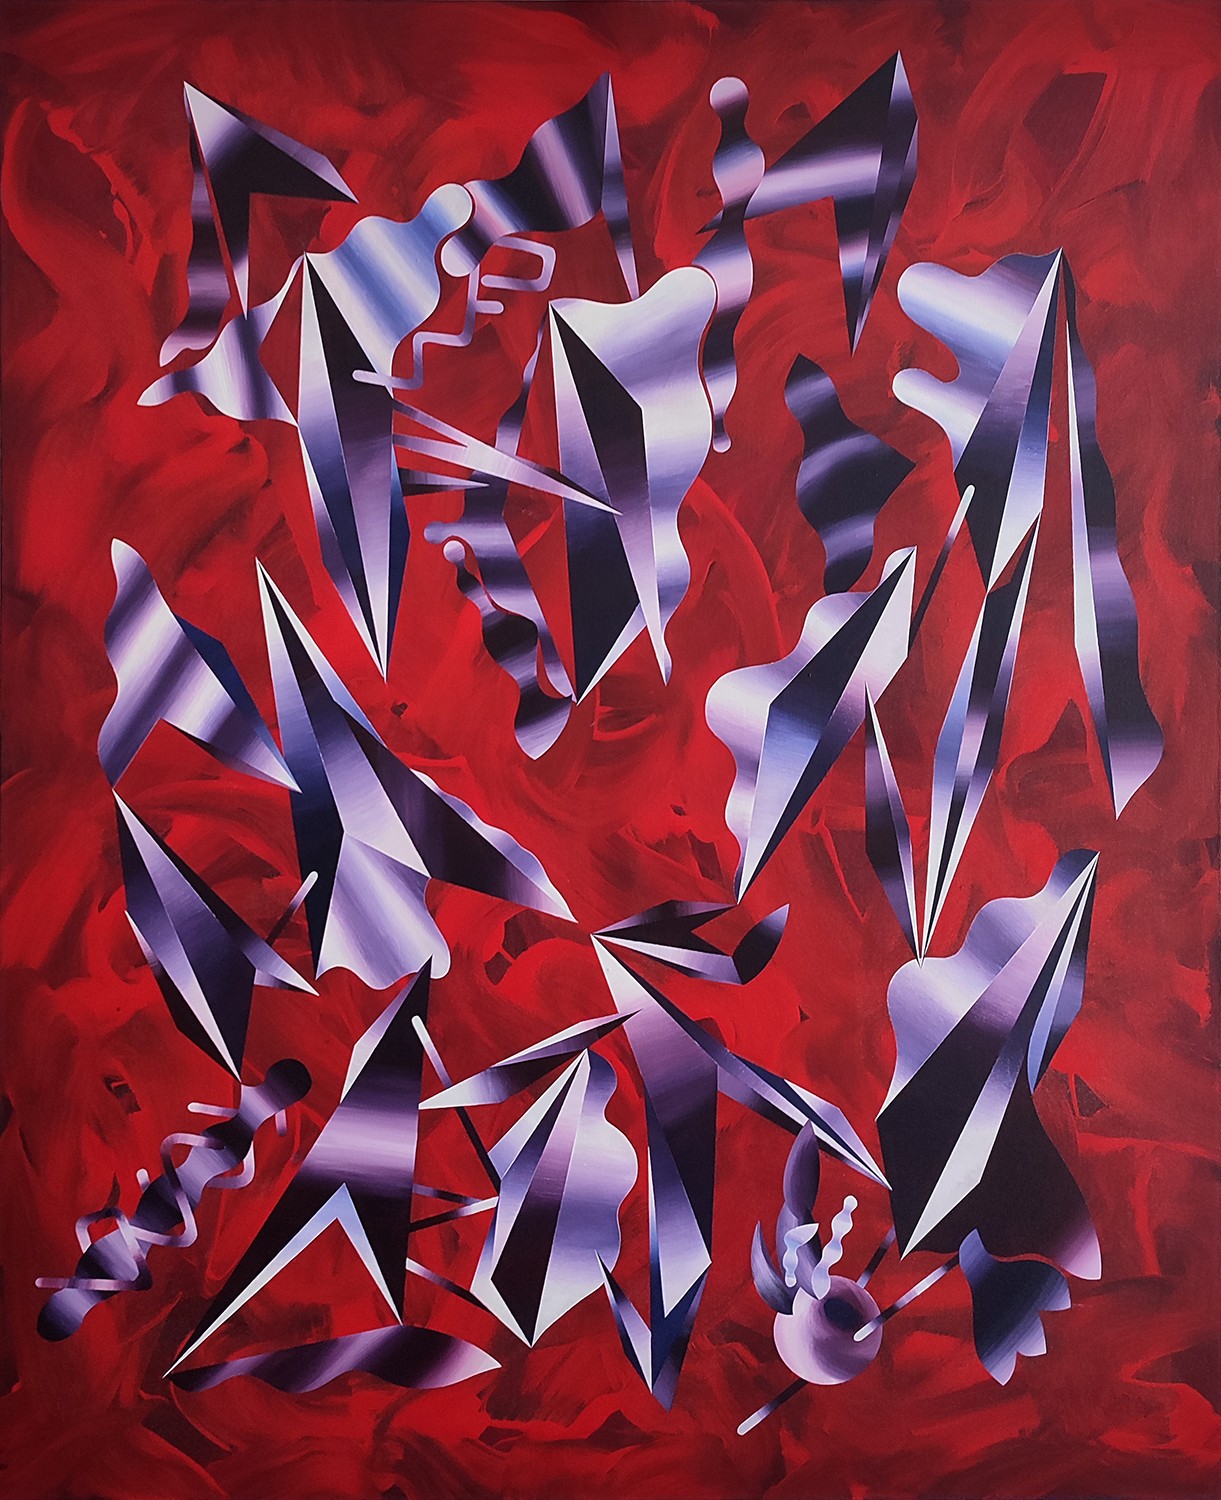 Tomasz-Piars-Crystals-of-Memory-2021-No.3.-acrylic-on-canvas-160x130cm